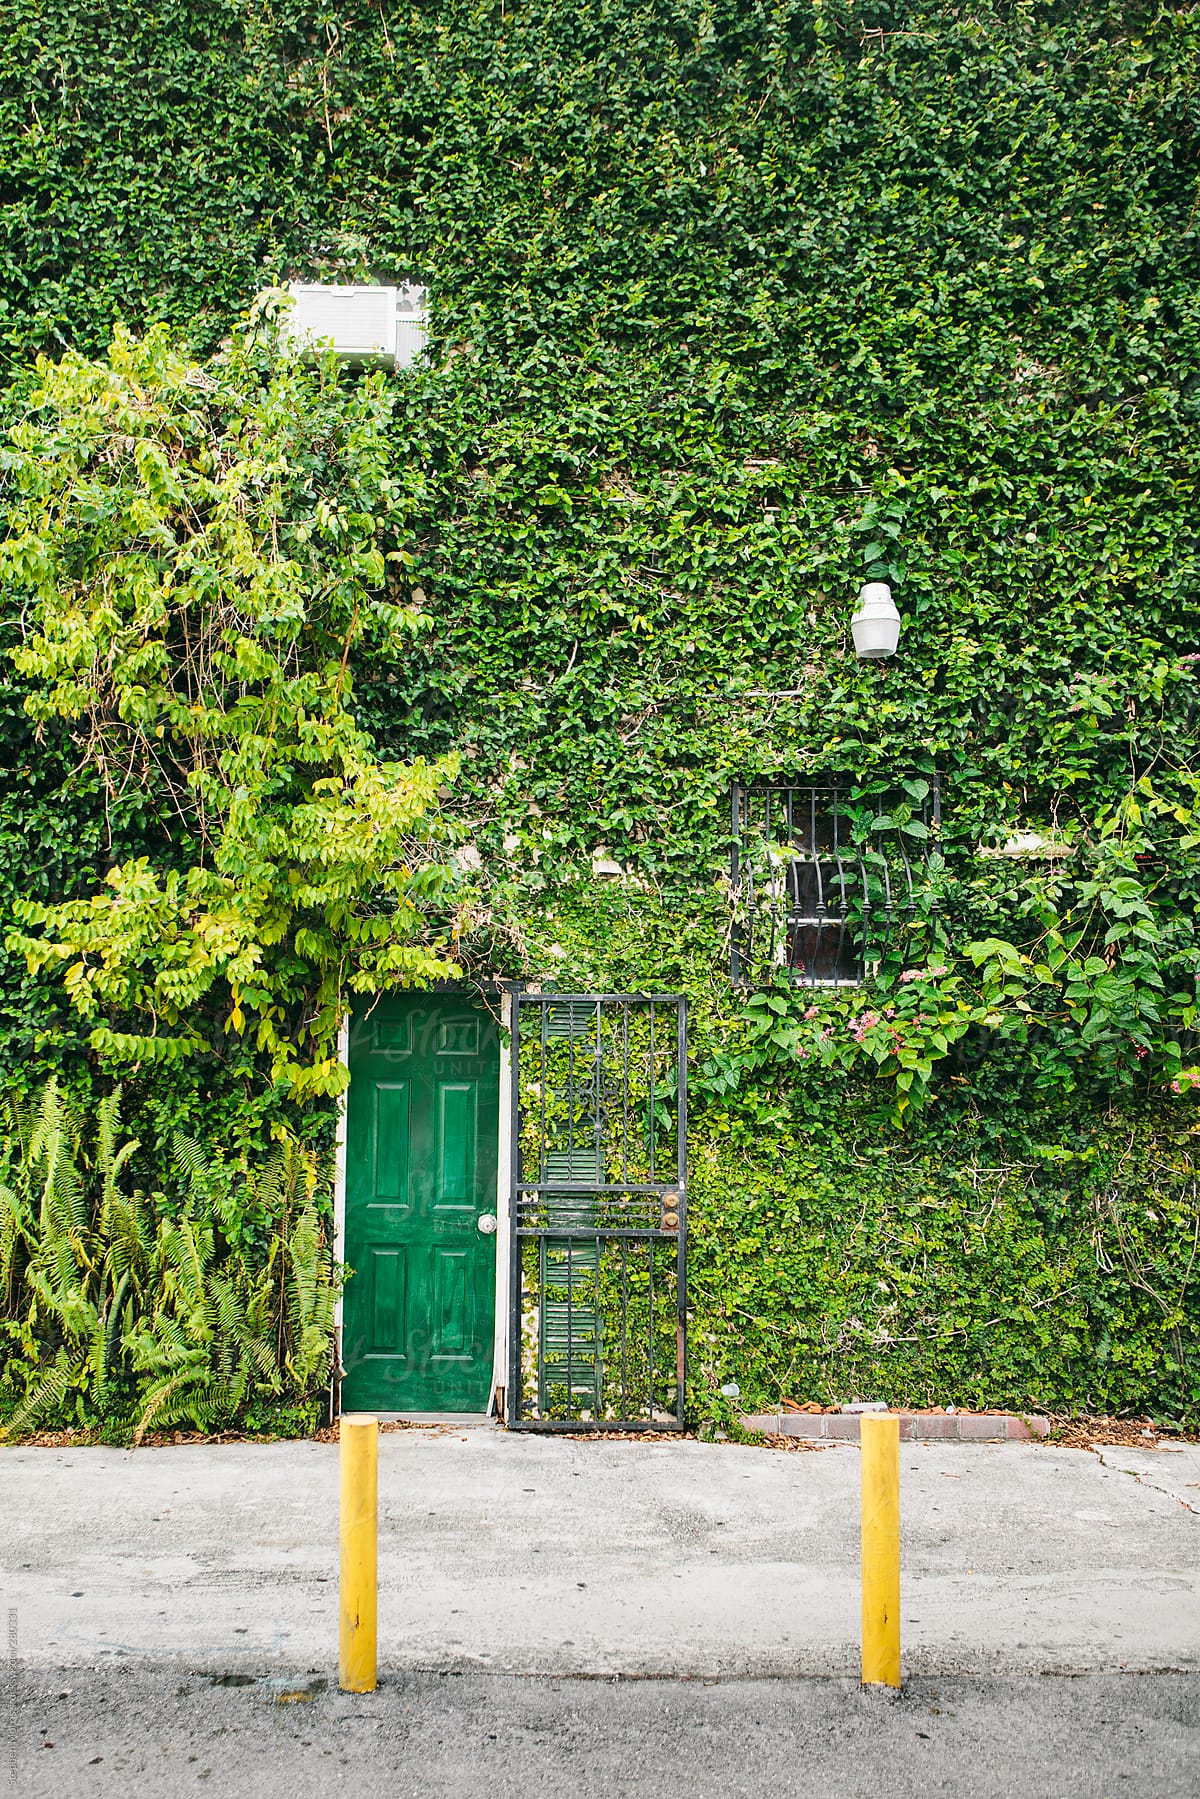 Building Facade Covered in Ivy